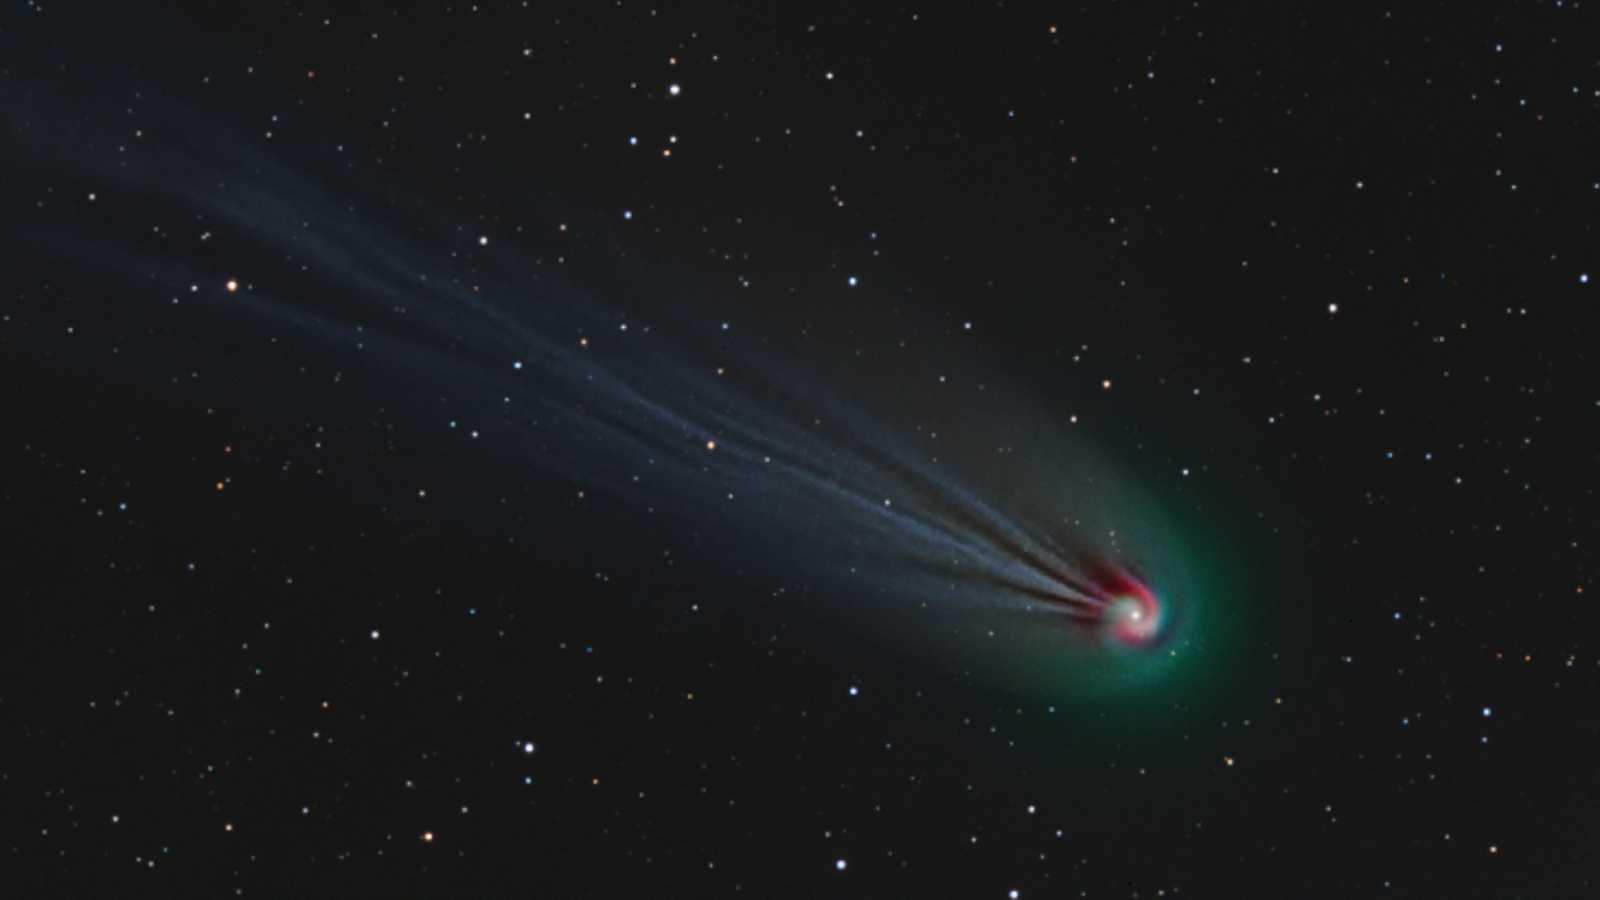 A comet with a spiral of light in its coma